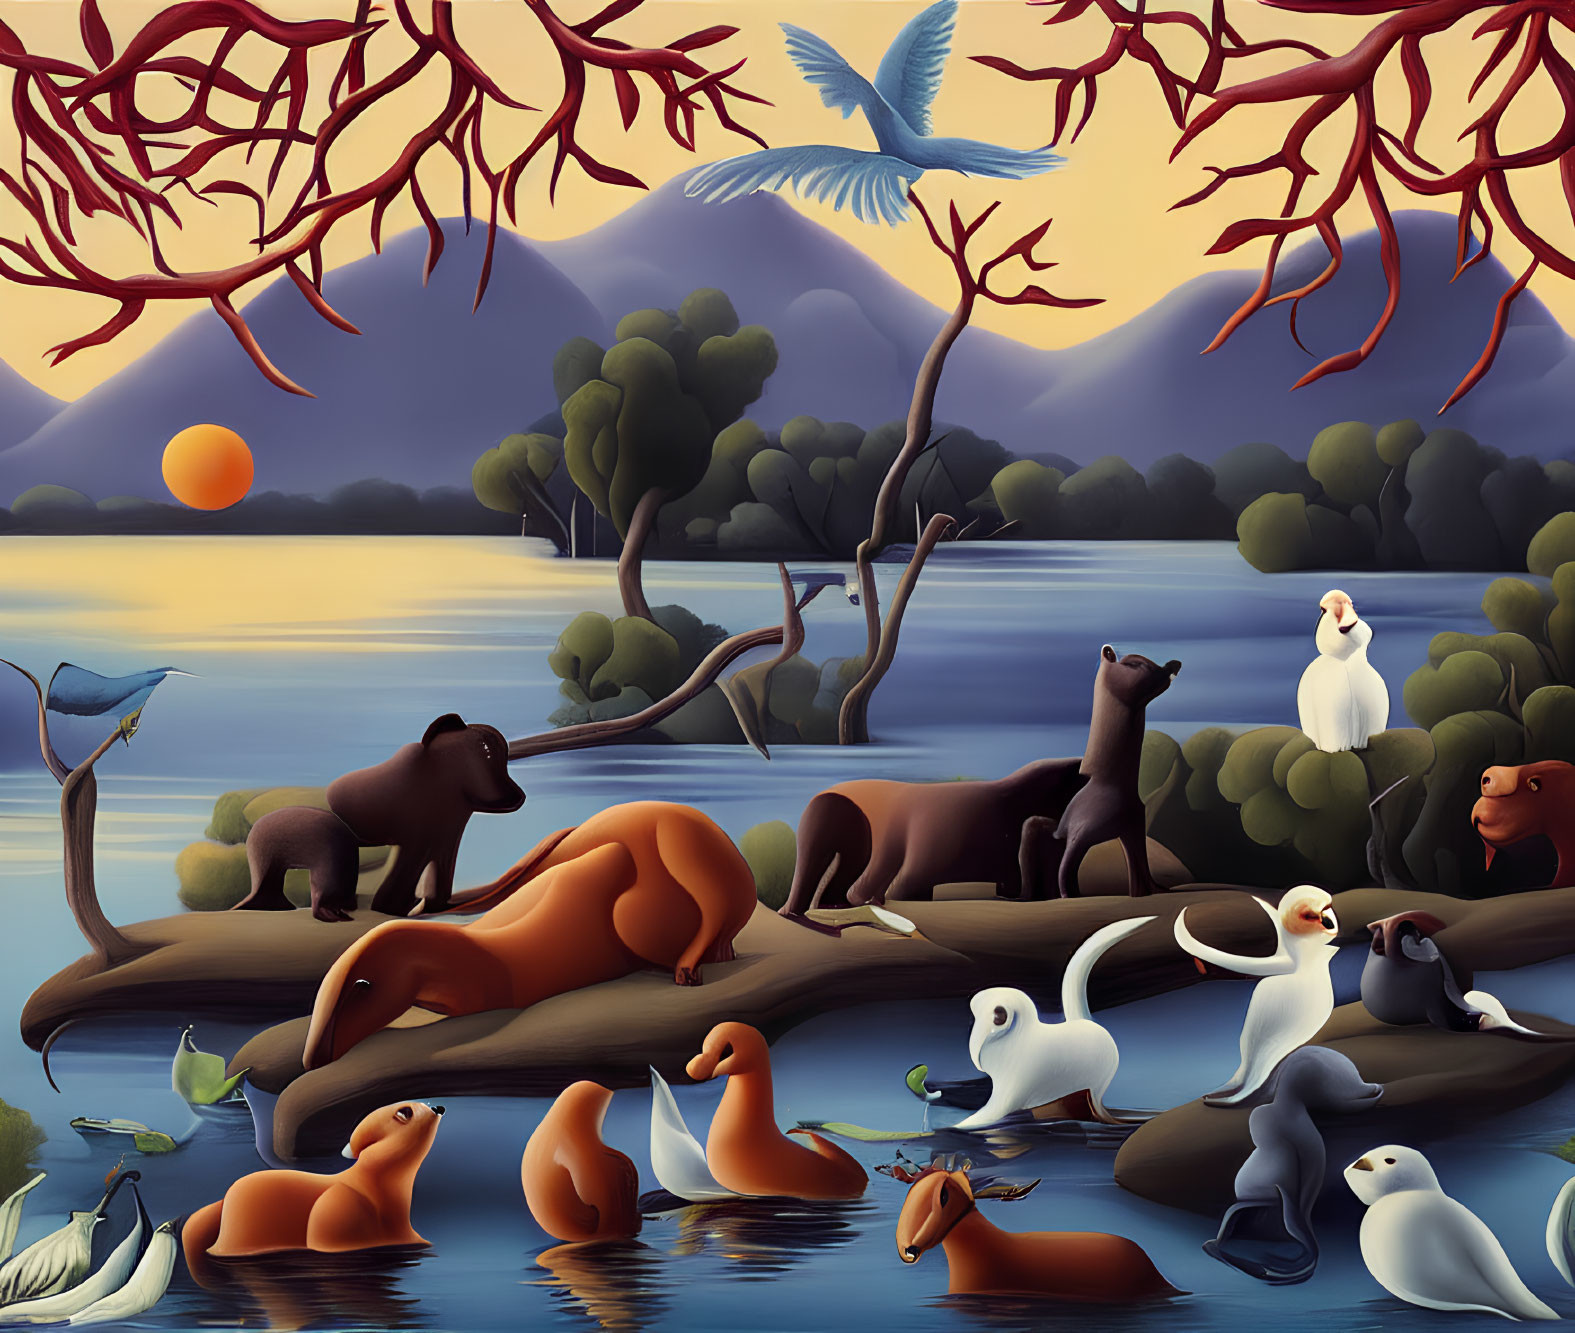 Stylized painting of animals by lake at sunset